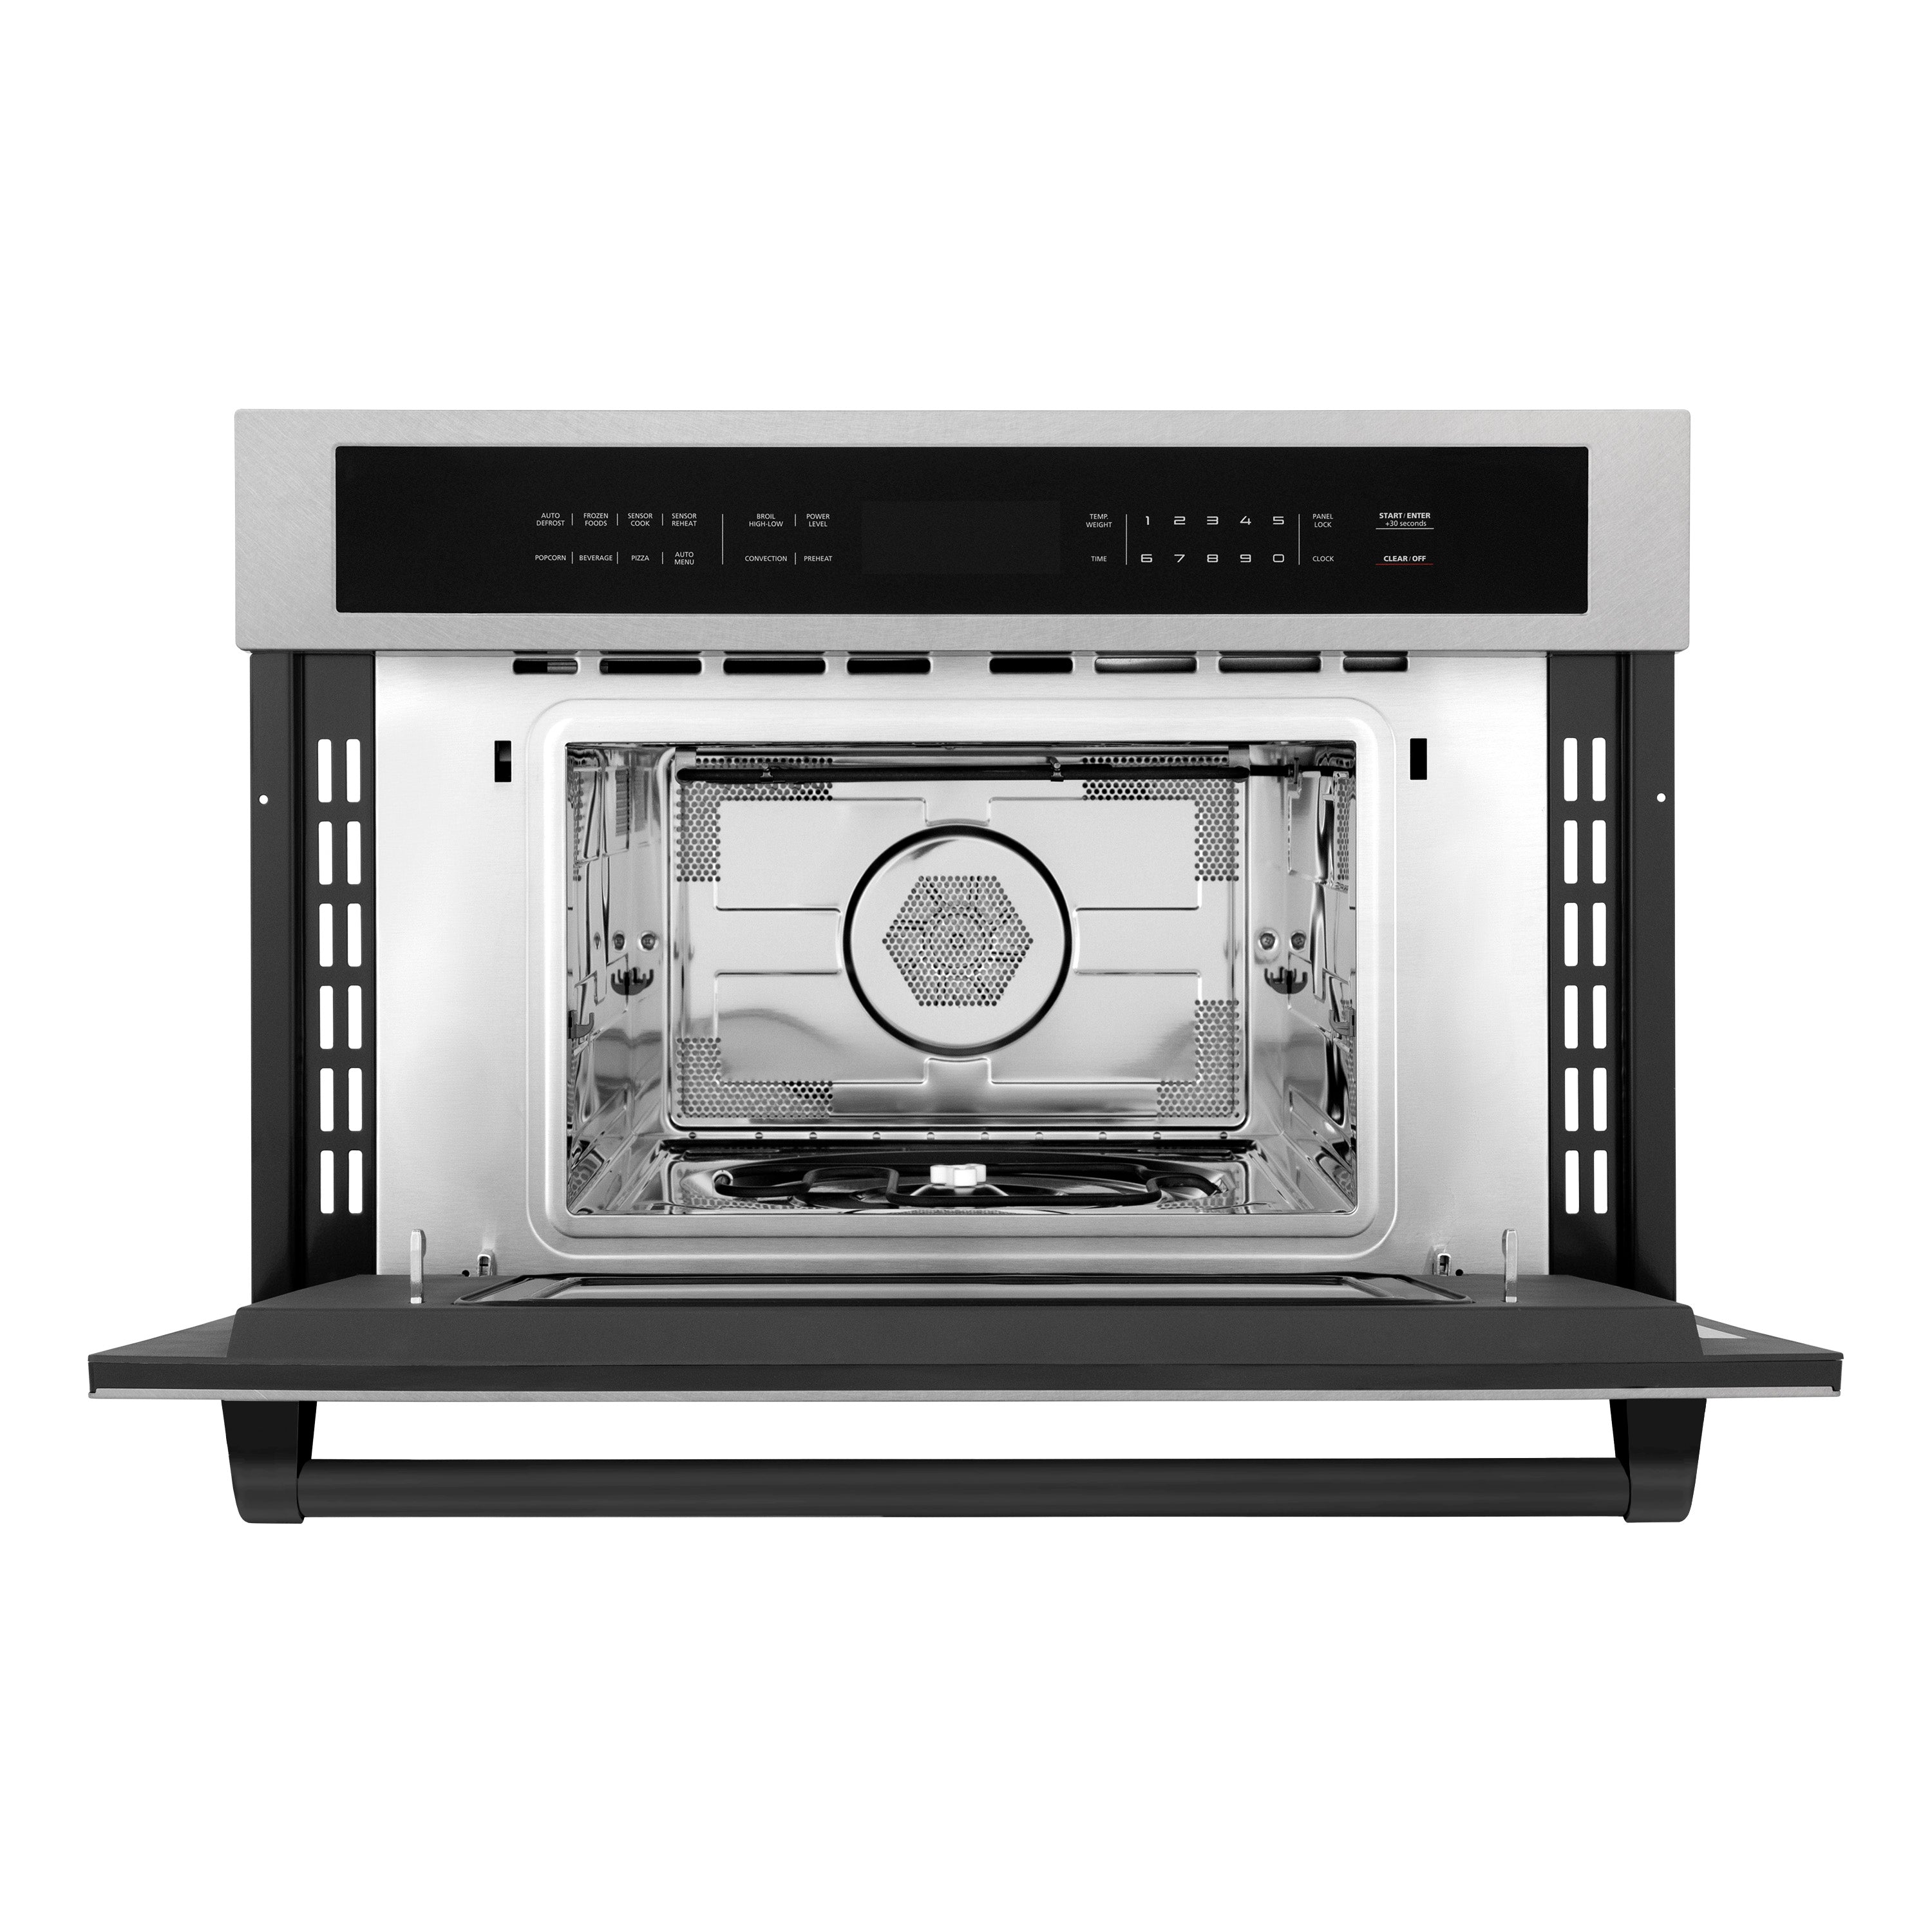 ZLINE Autograph Edition 30 in. 1.6 cu ft. Built-in Convection Microwave Oven in Fingerprint Resistant Stainless Steel with Matte Black Accents (MWOZ-30-SS-MB) Front View Door Open